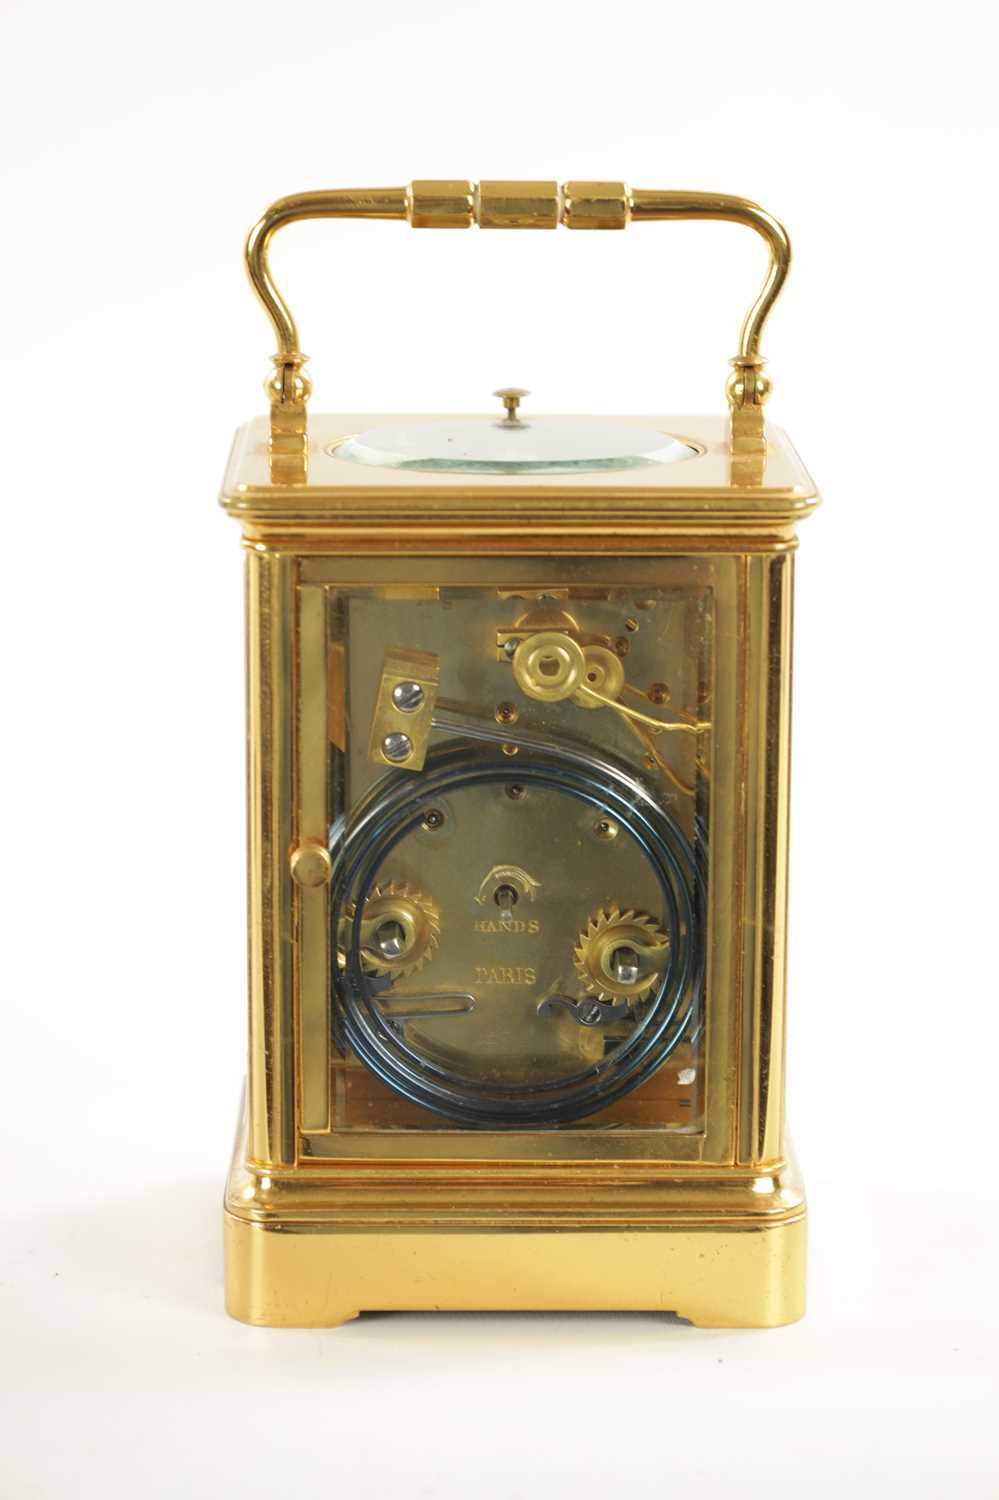 A LATE 19TH CENTURY FRENCH GRAND SONNERIE REPEATING CARRIAGE CLOCK - Image 6 of 8